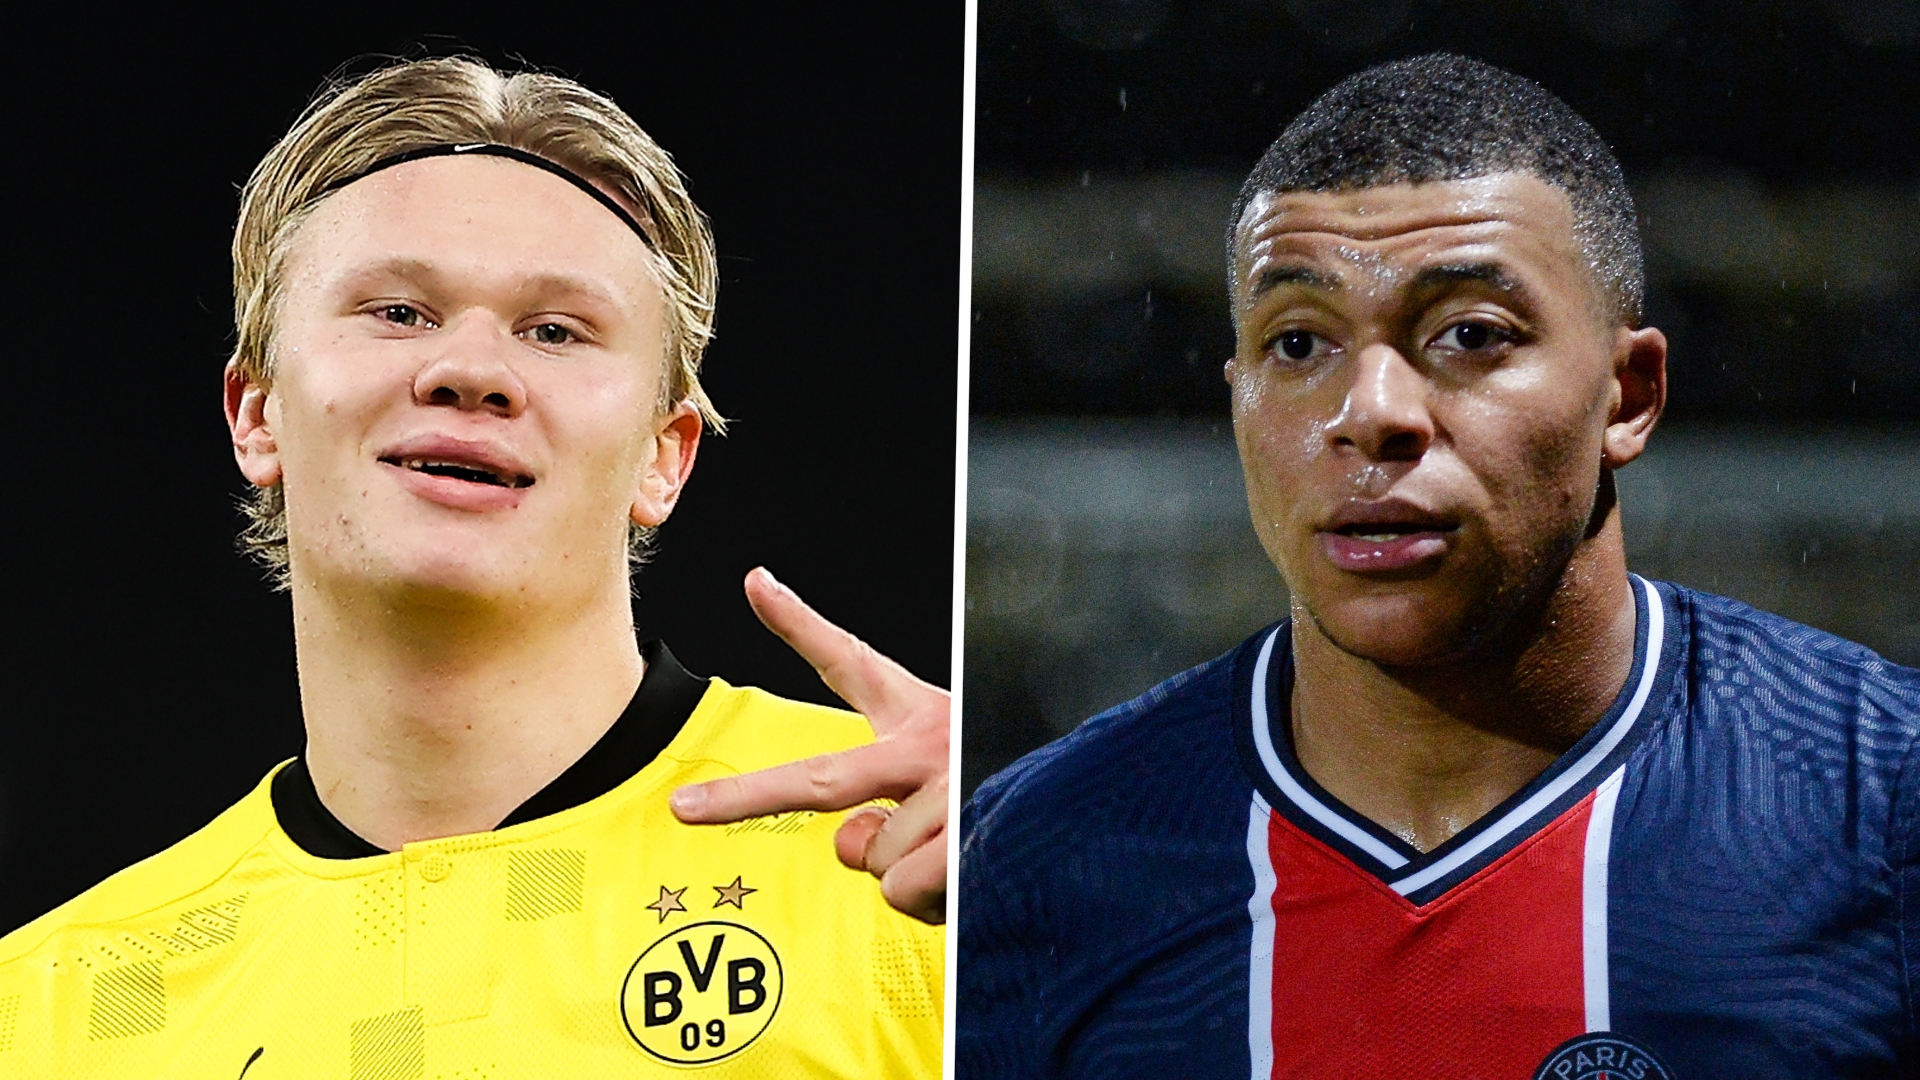 'Haaland is easier for Real Madrid to sign than Mbappe' - Ramos picks Dortmund star as ideal target for Blancos